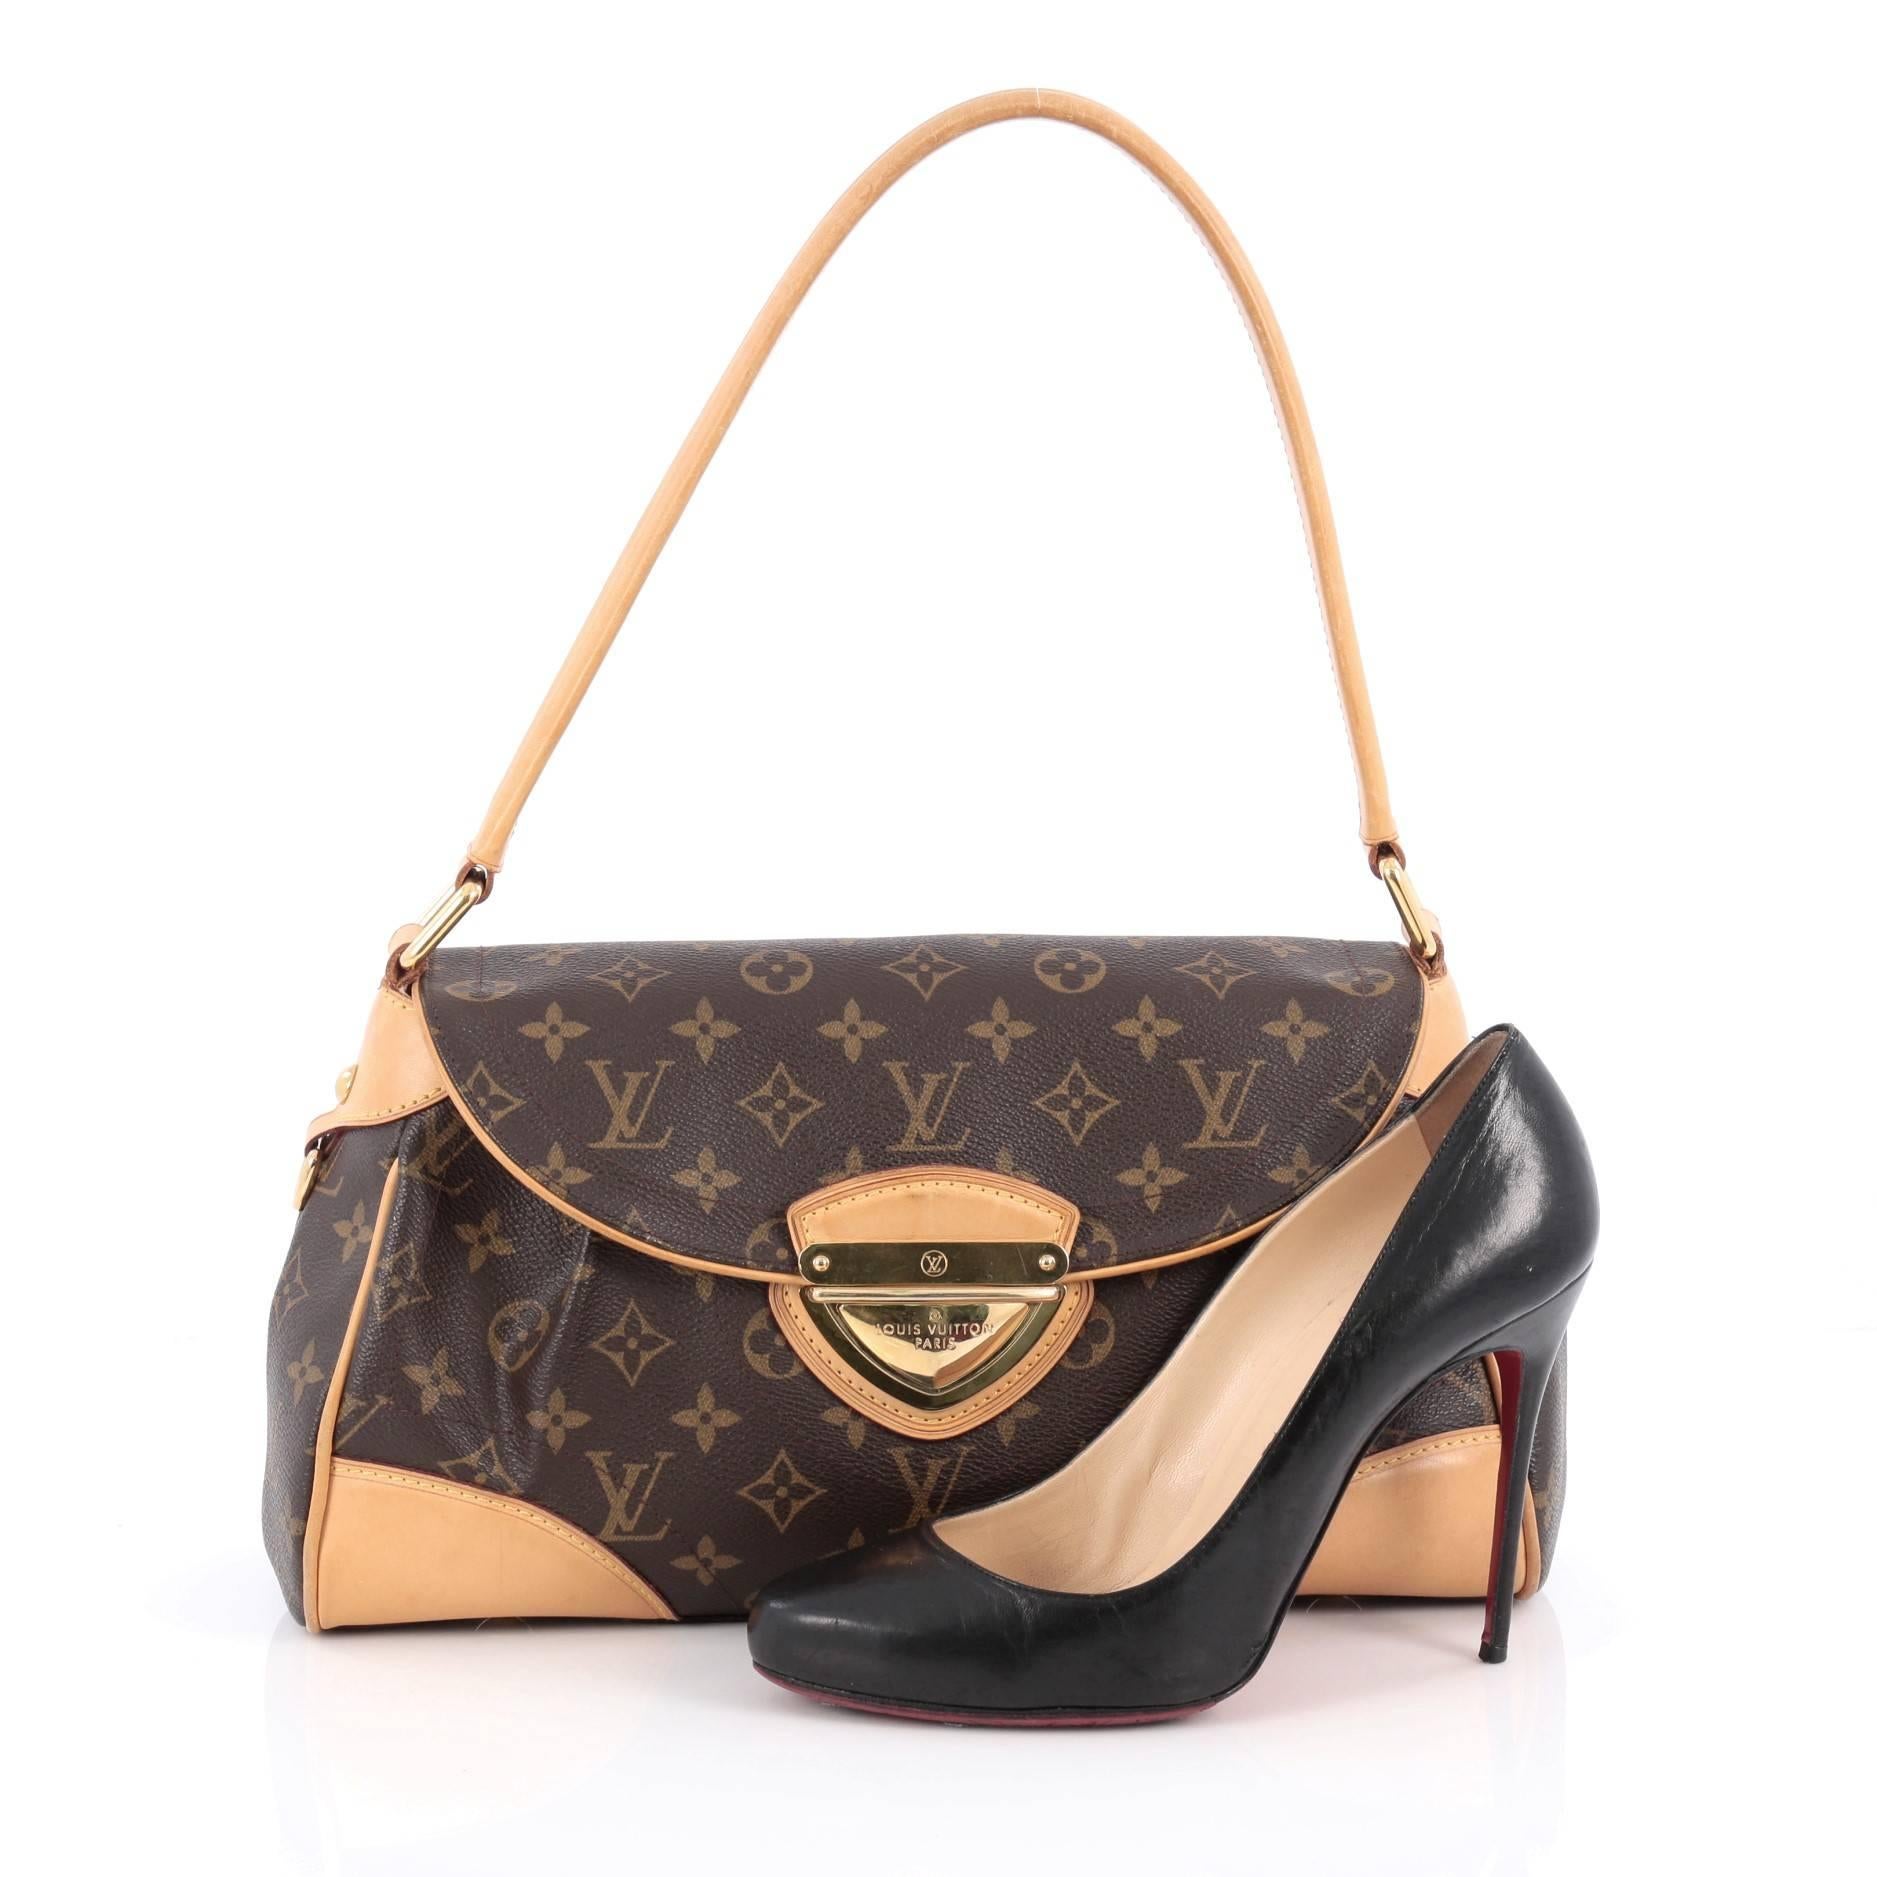 This authentic Louis Vuitton Beverly Handbag Monogram Canvas MM is a feminine and functional accessory perfect for everyday use. Crafted from Louis Vuitton’s signature brown monogram coated canvas, this beloved shoulder bag features natural cowhide